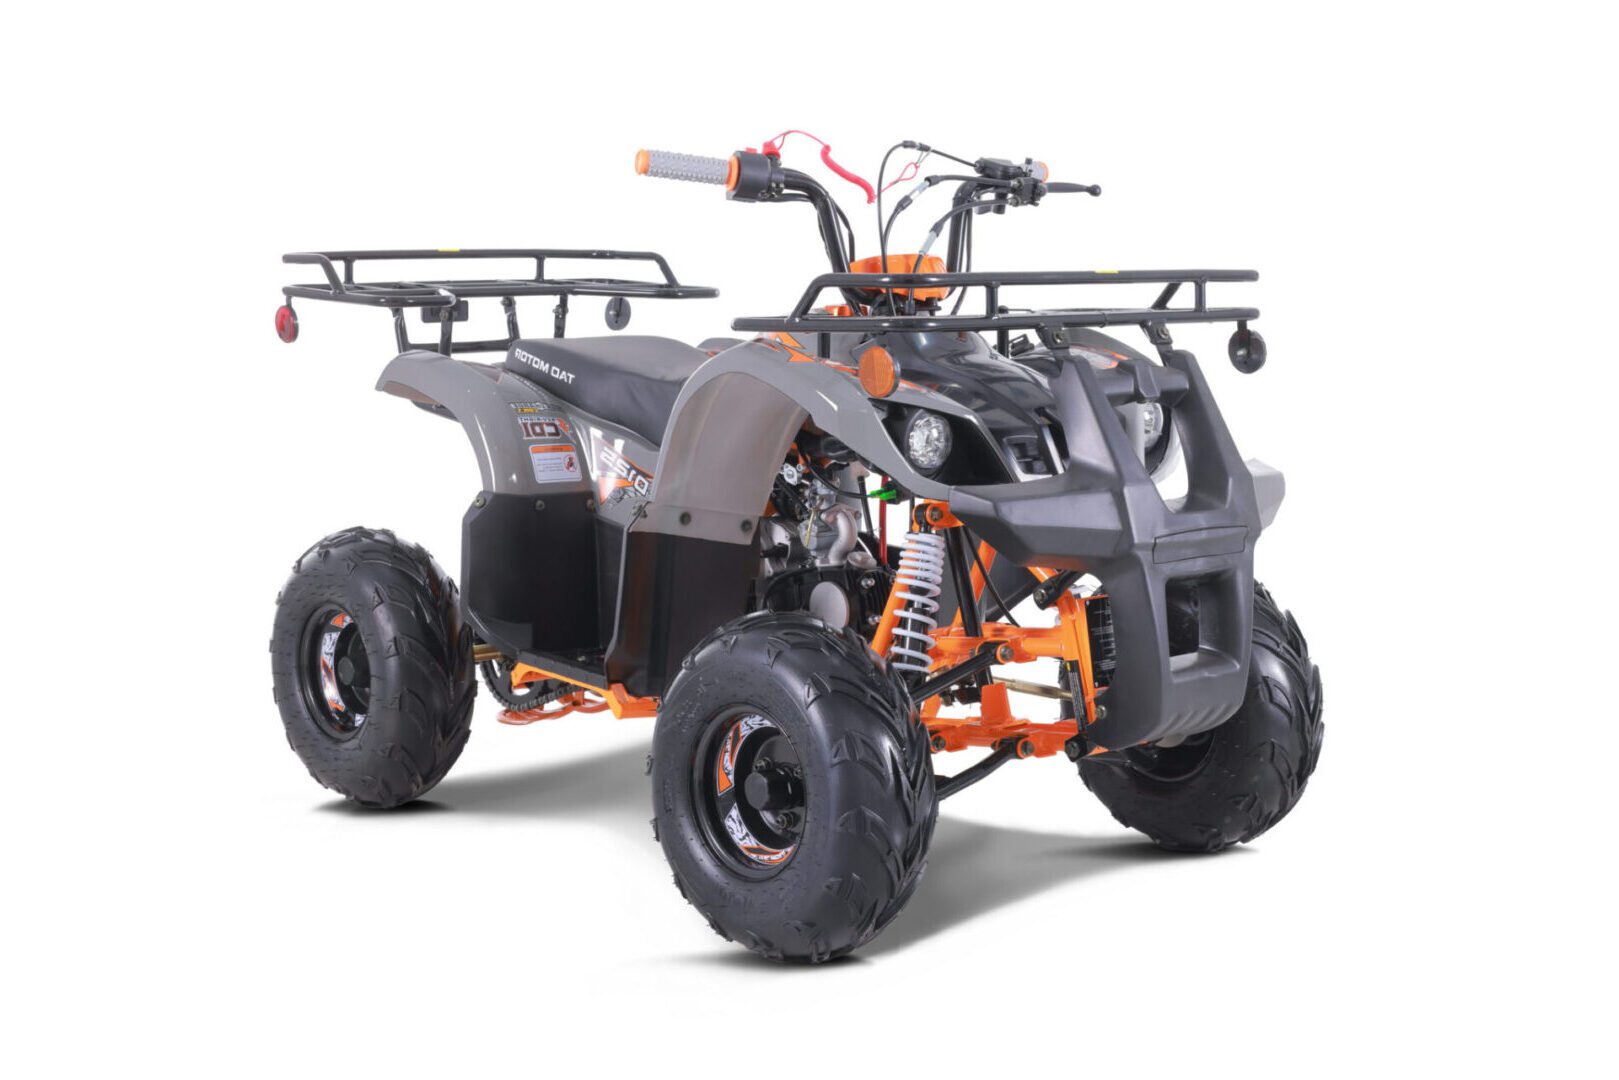 A picture of an atv with the front and rear racks.